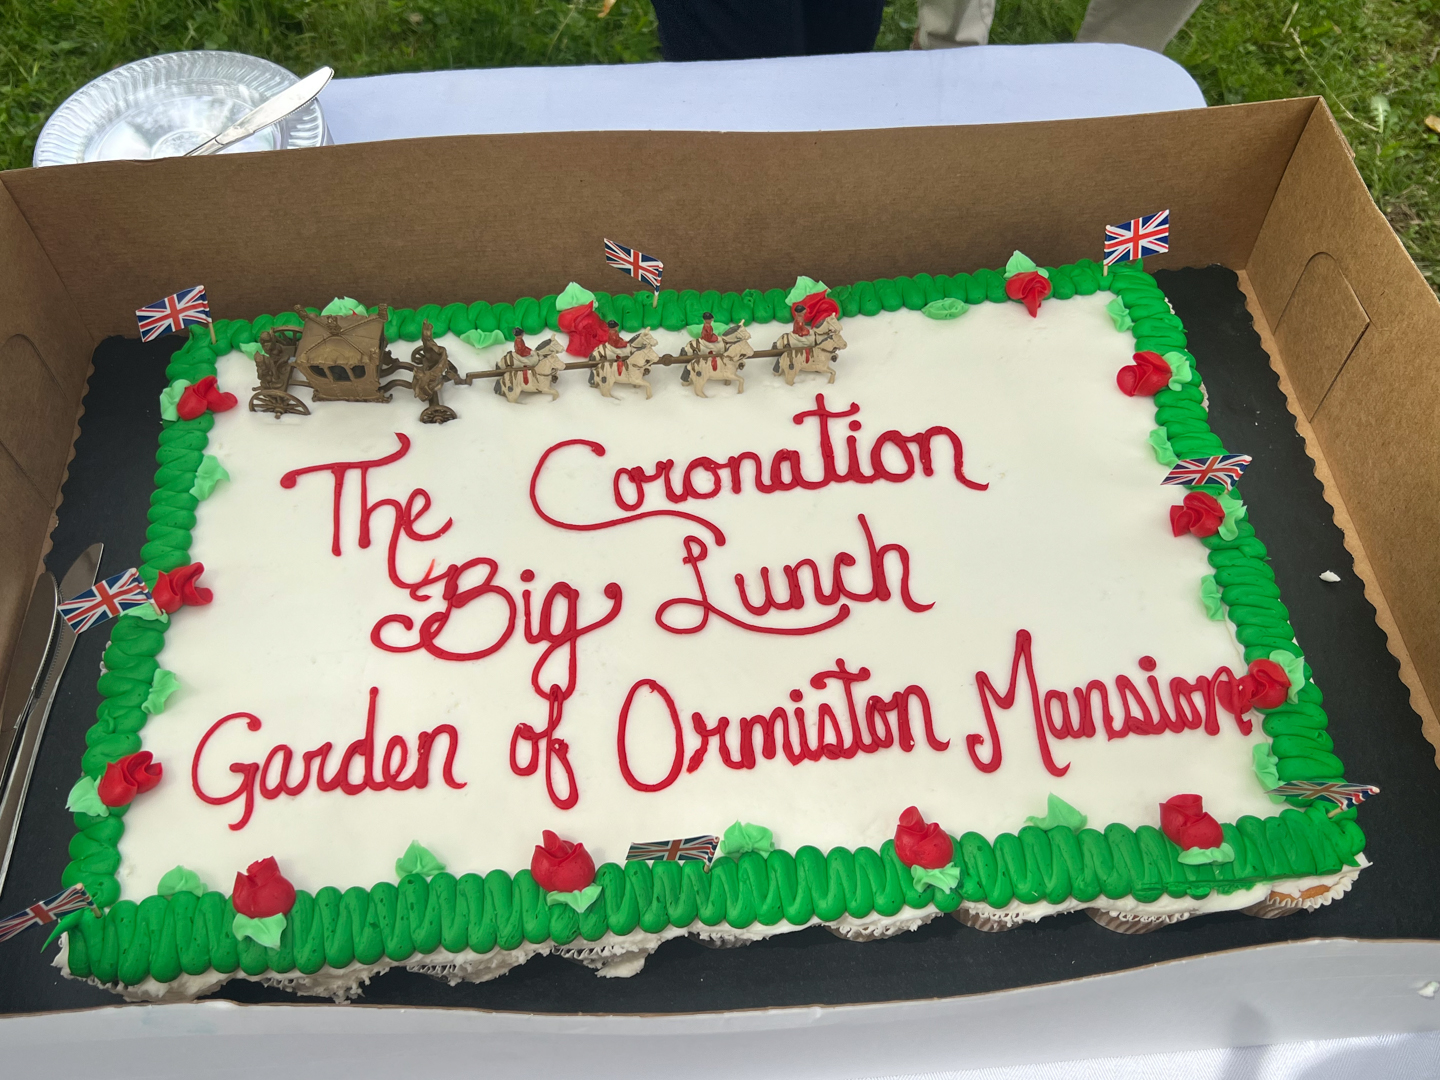 The Coronation BIG LUNCH at the Garden of Ormiston Mansion